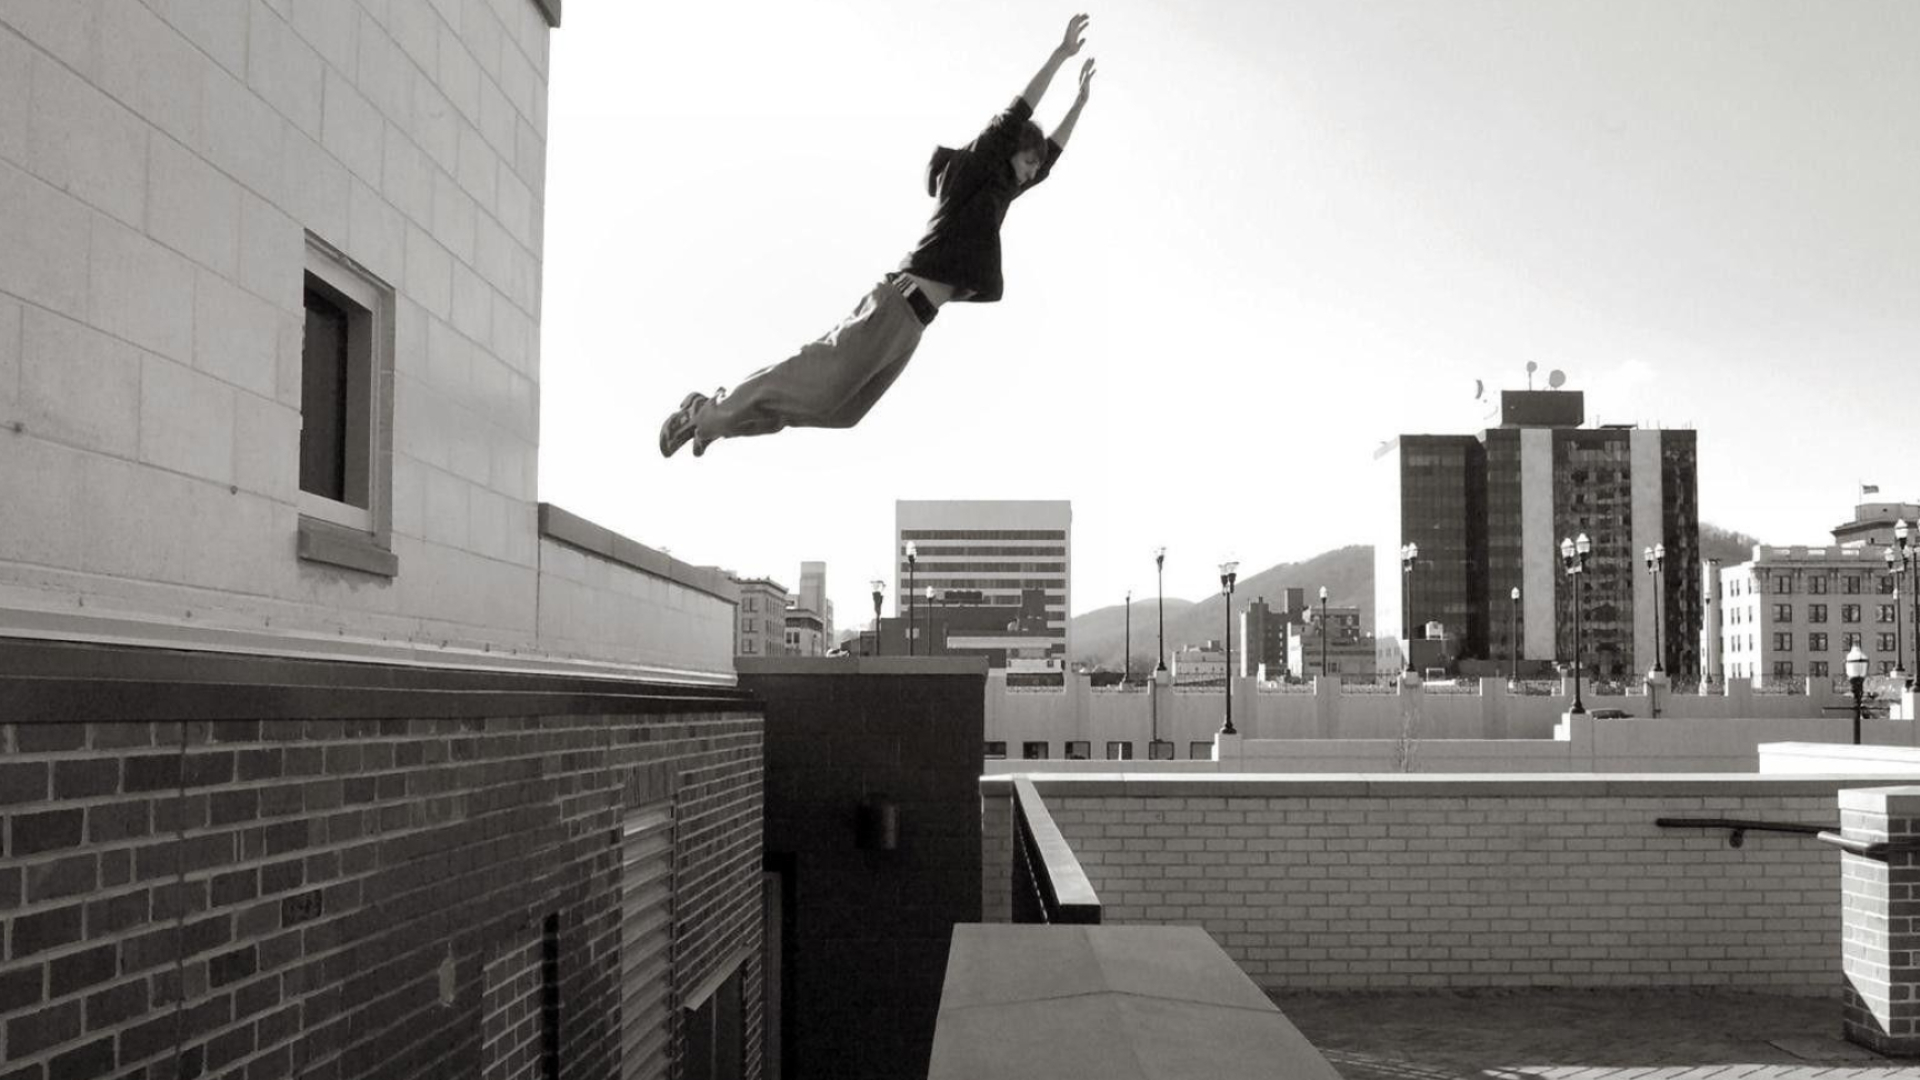 Freerunning: Parkour movements, Aesthetic element of speed jumping, Tracers, Monochrome. 1920x1080 Full HD Wallpaper.